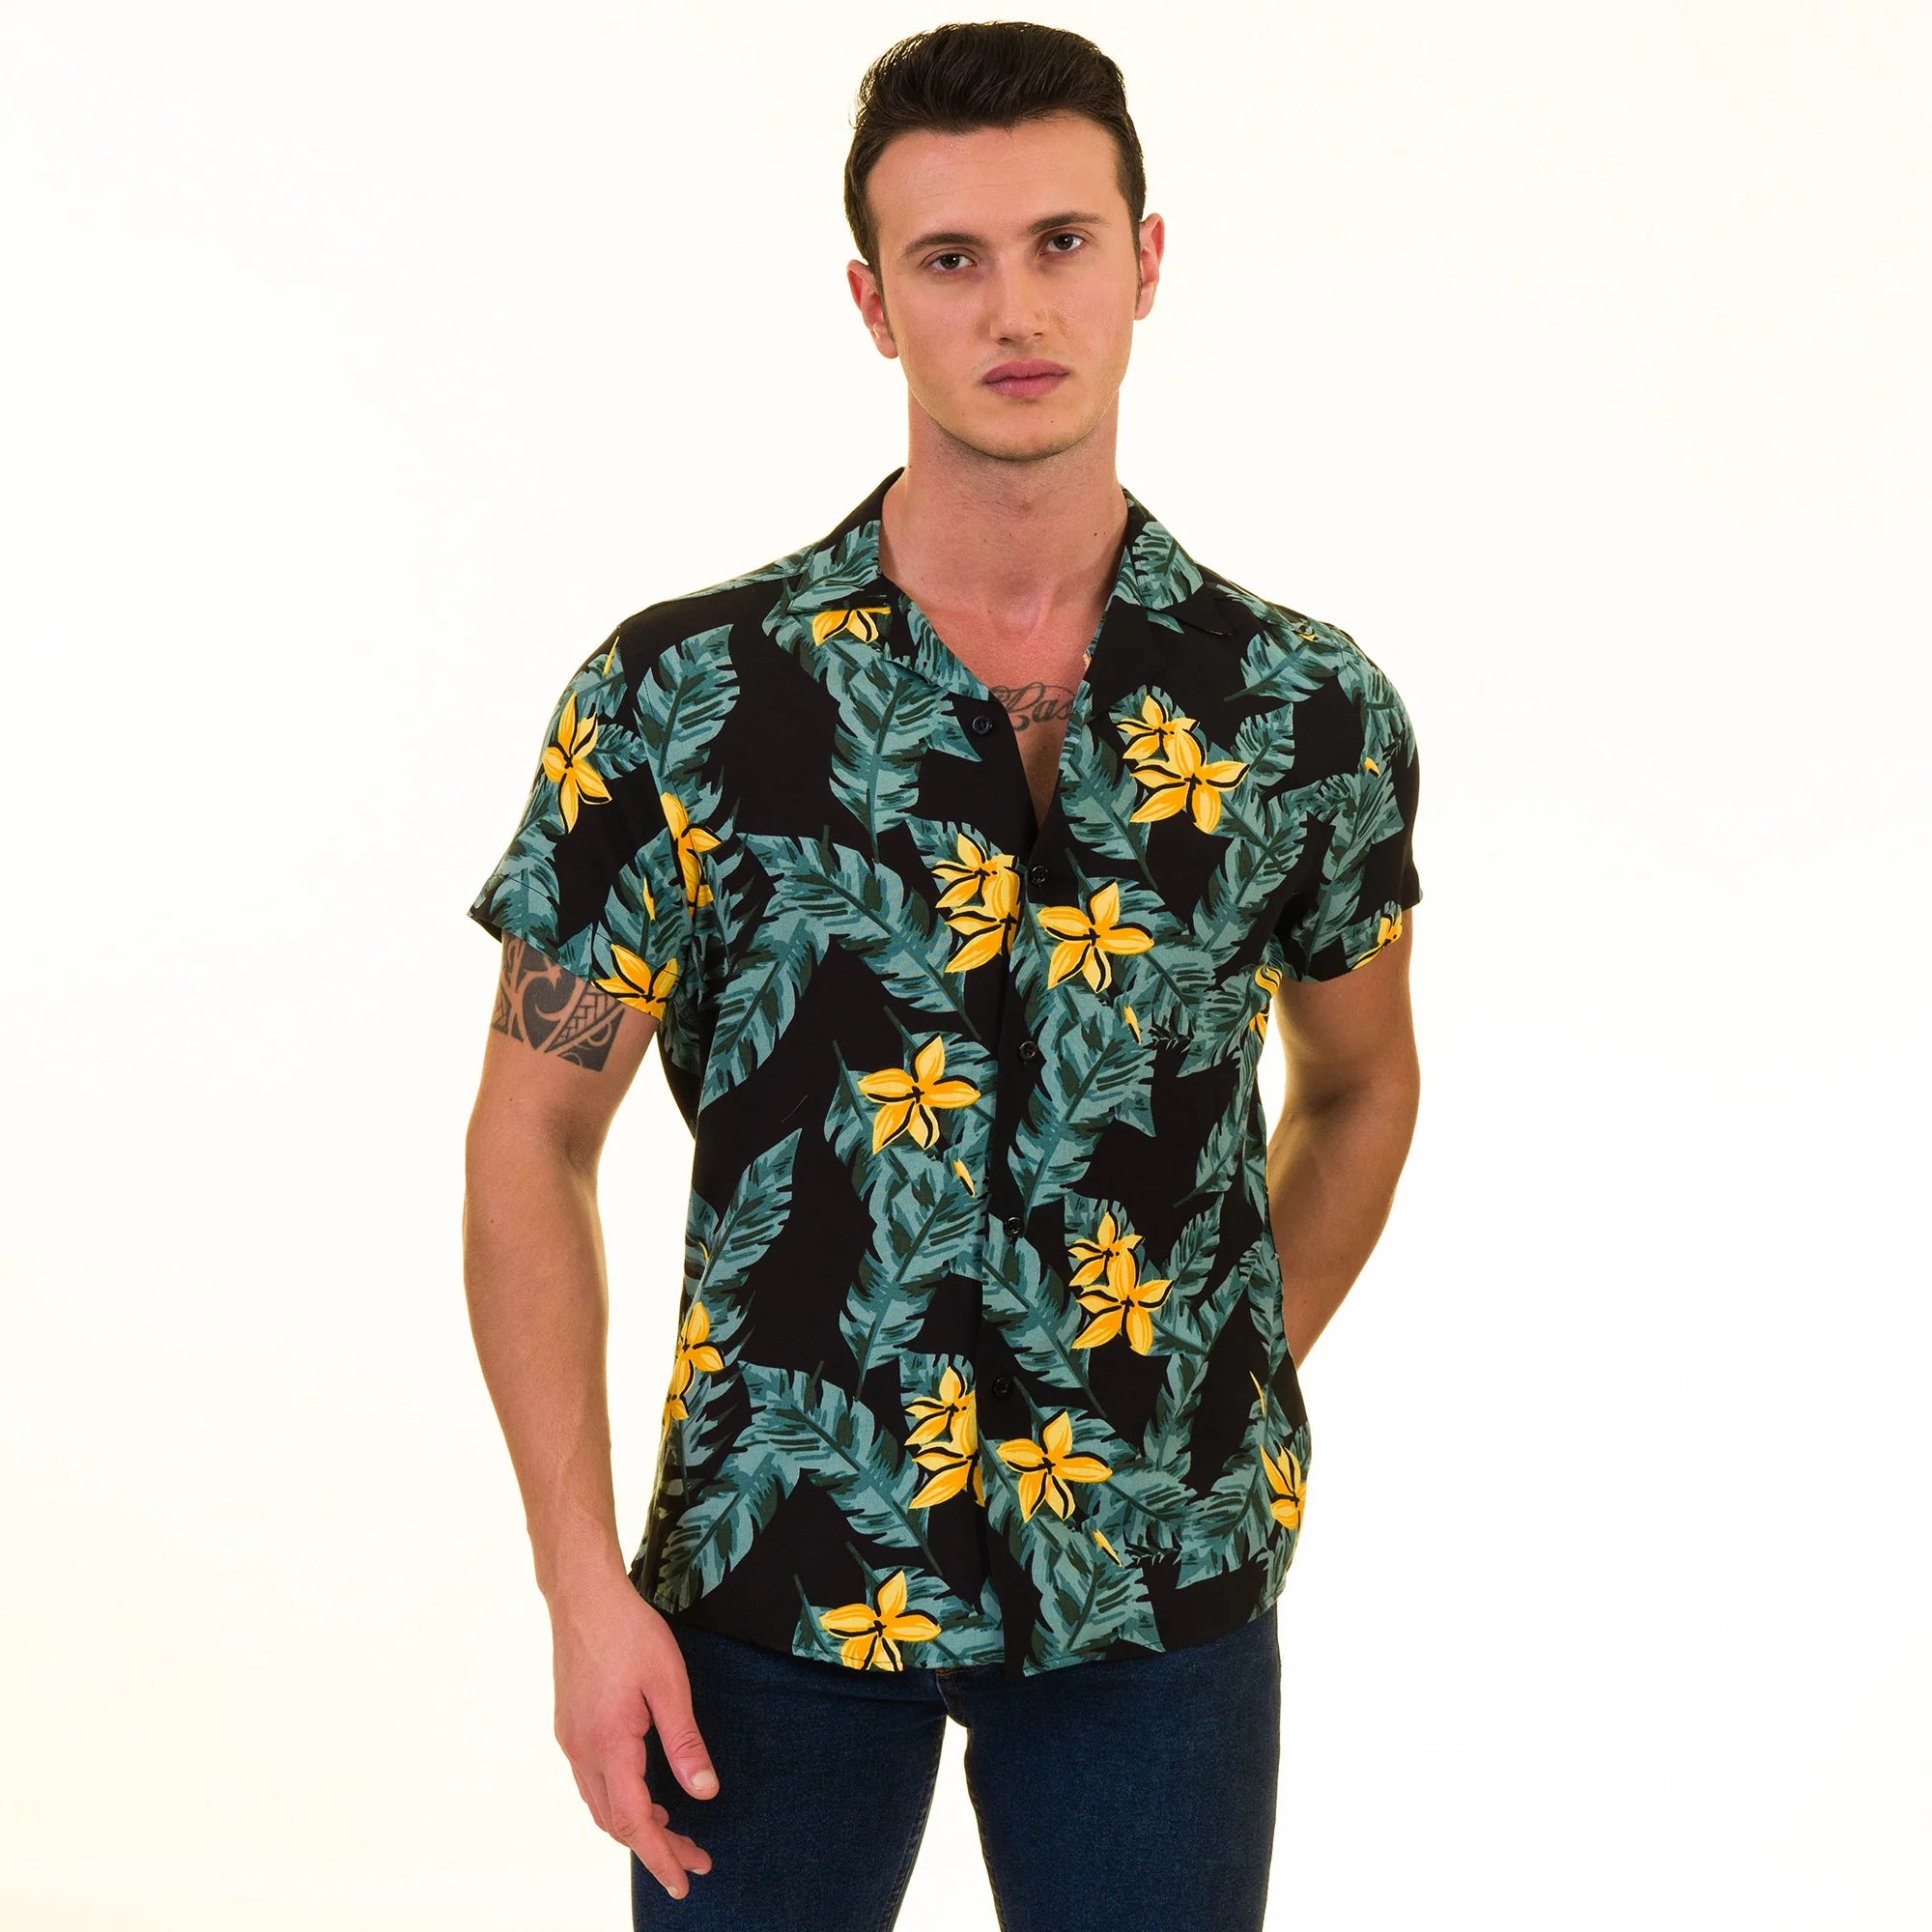 Discover the Best Places to Buy Hawaiian Shirts - Your Ultimate Guide ...